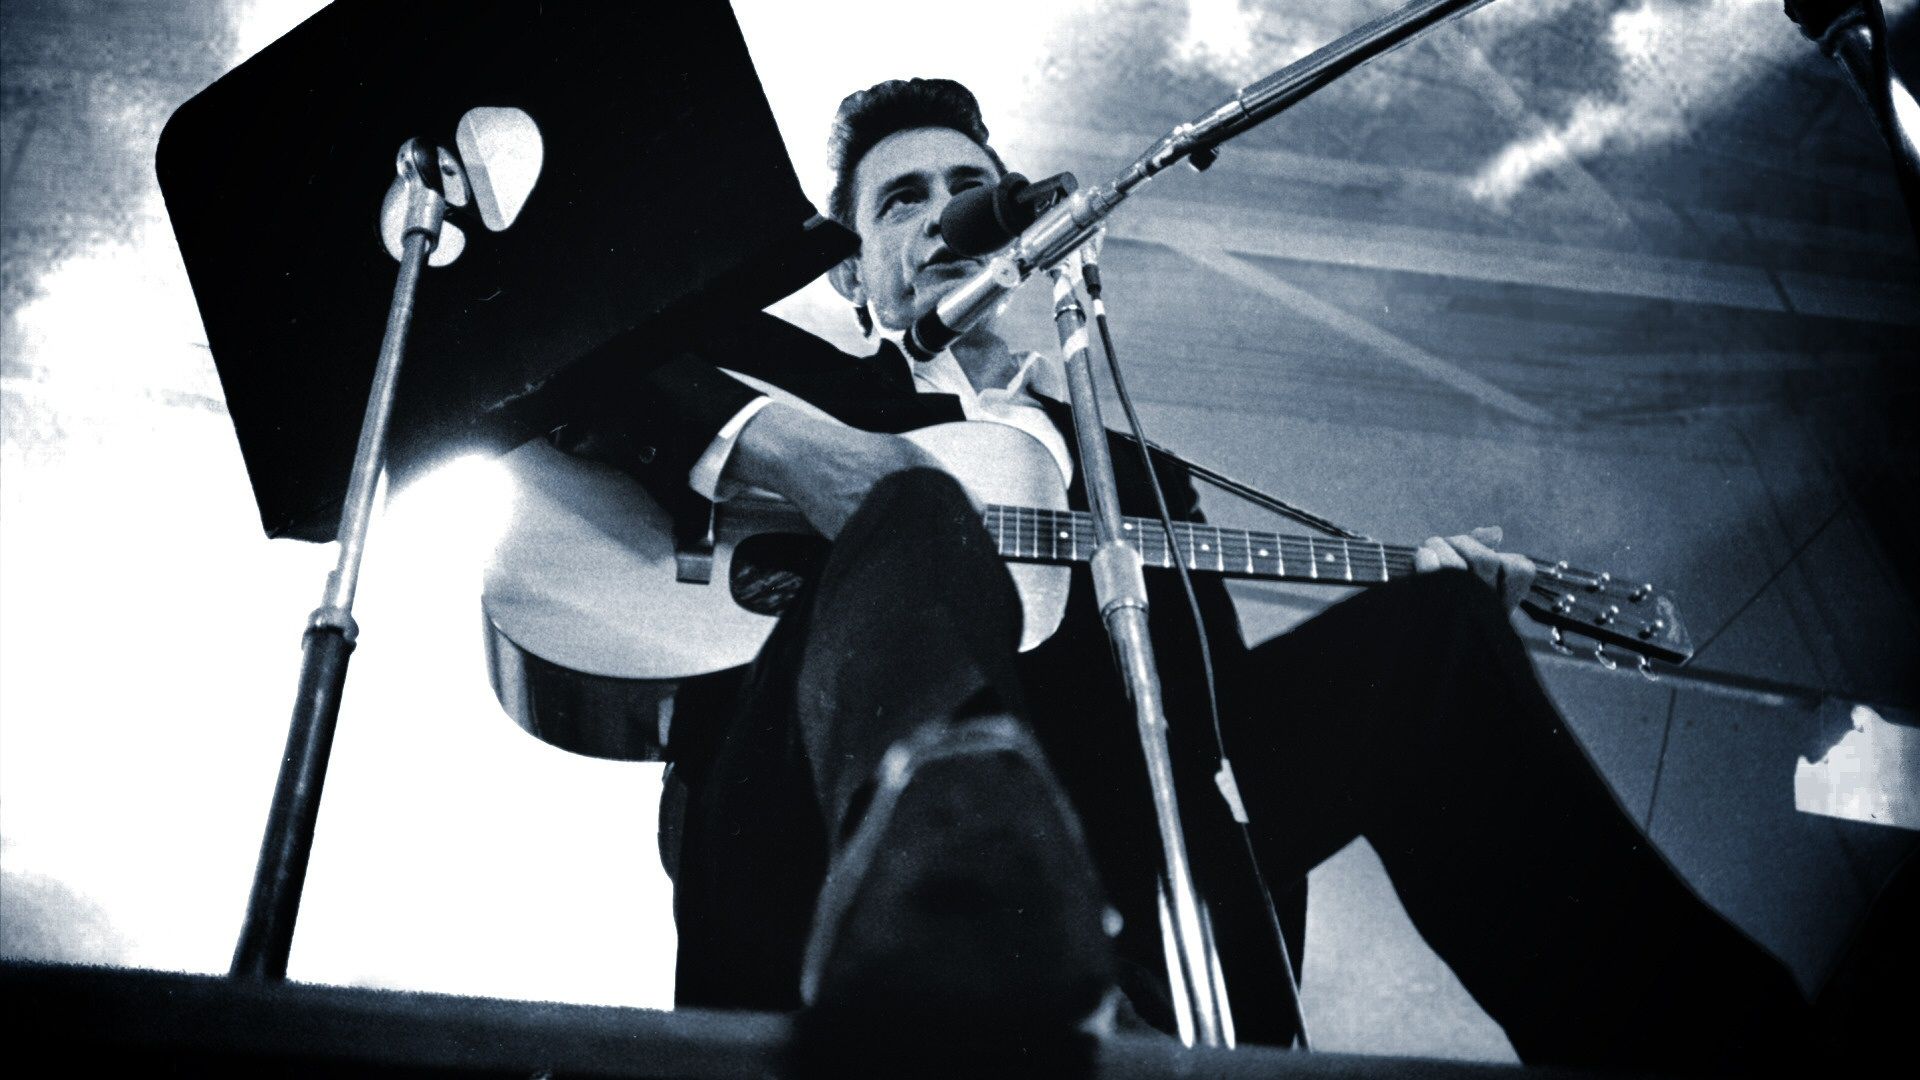 Johnny Cash Wallpapers High Resolution and Quality Download